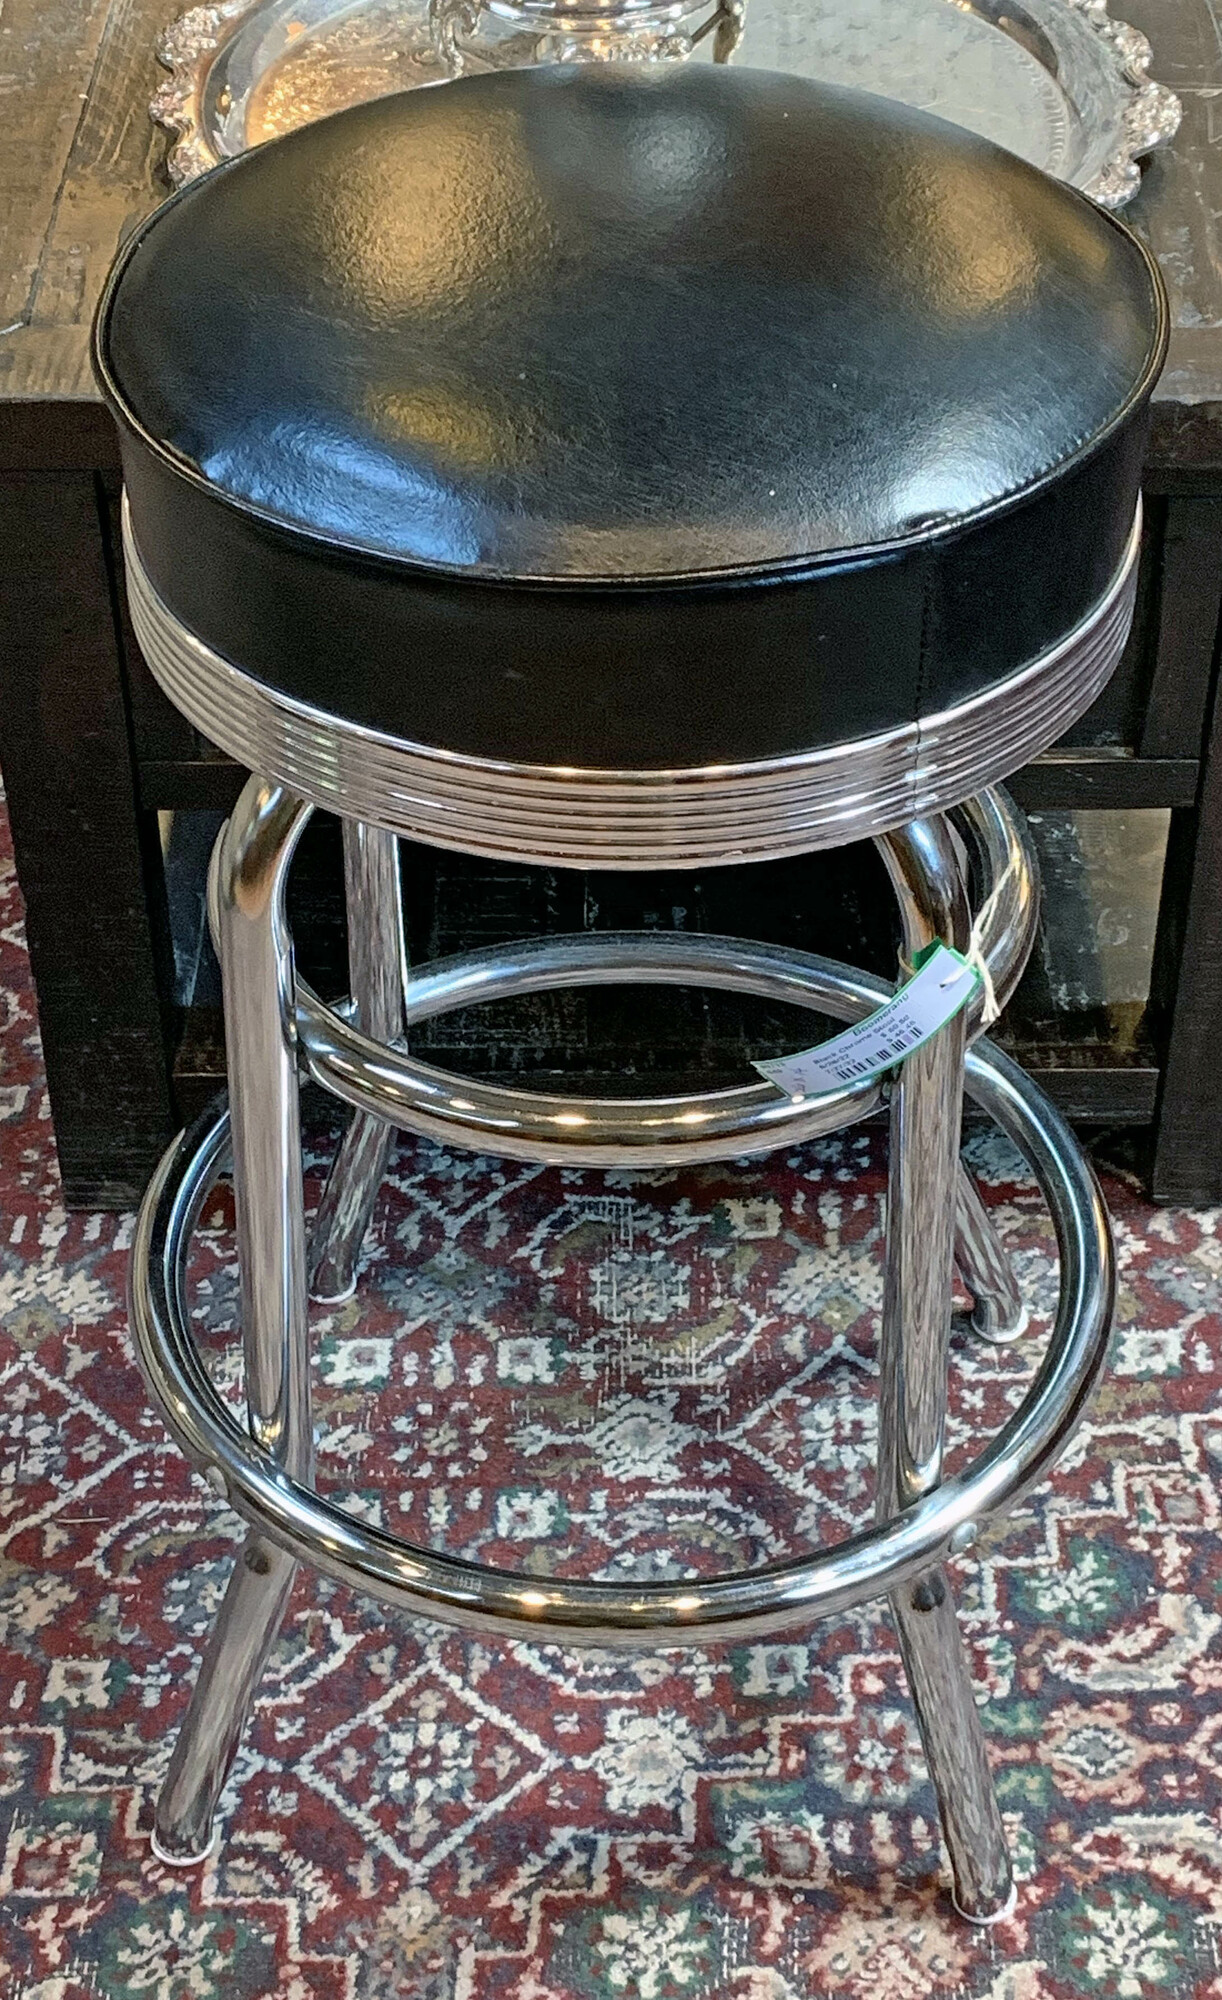 Black Chrome Stool - $50.50
26 In Tall X 14 In Round